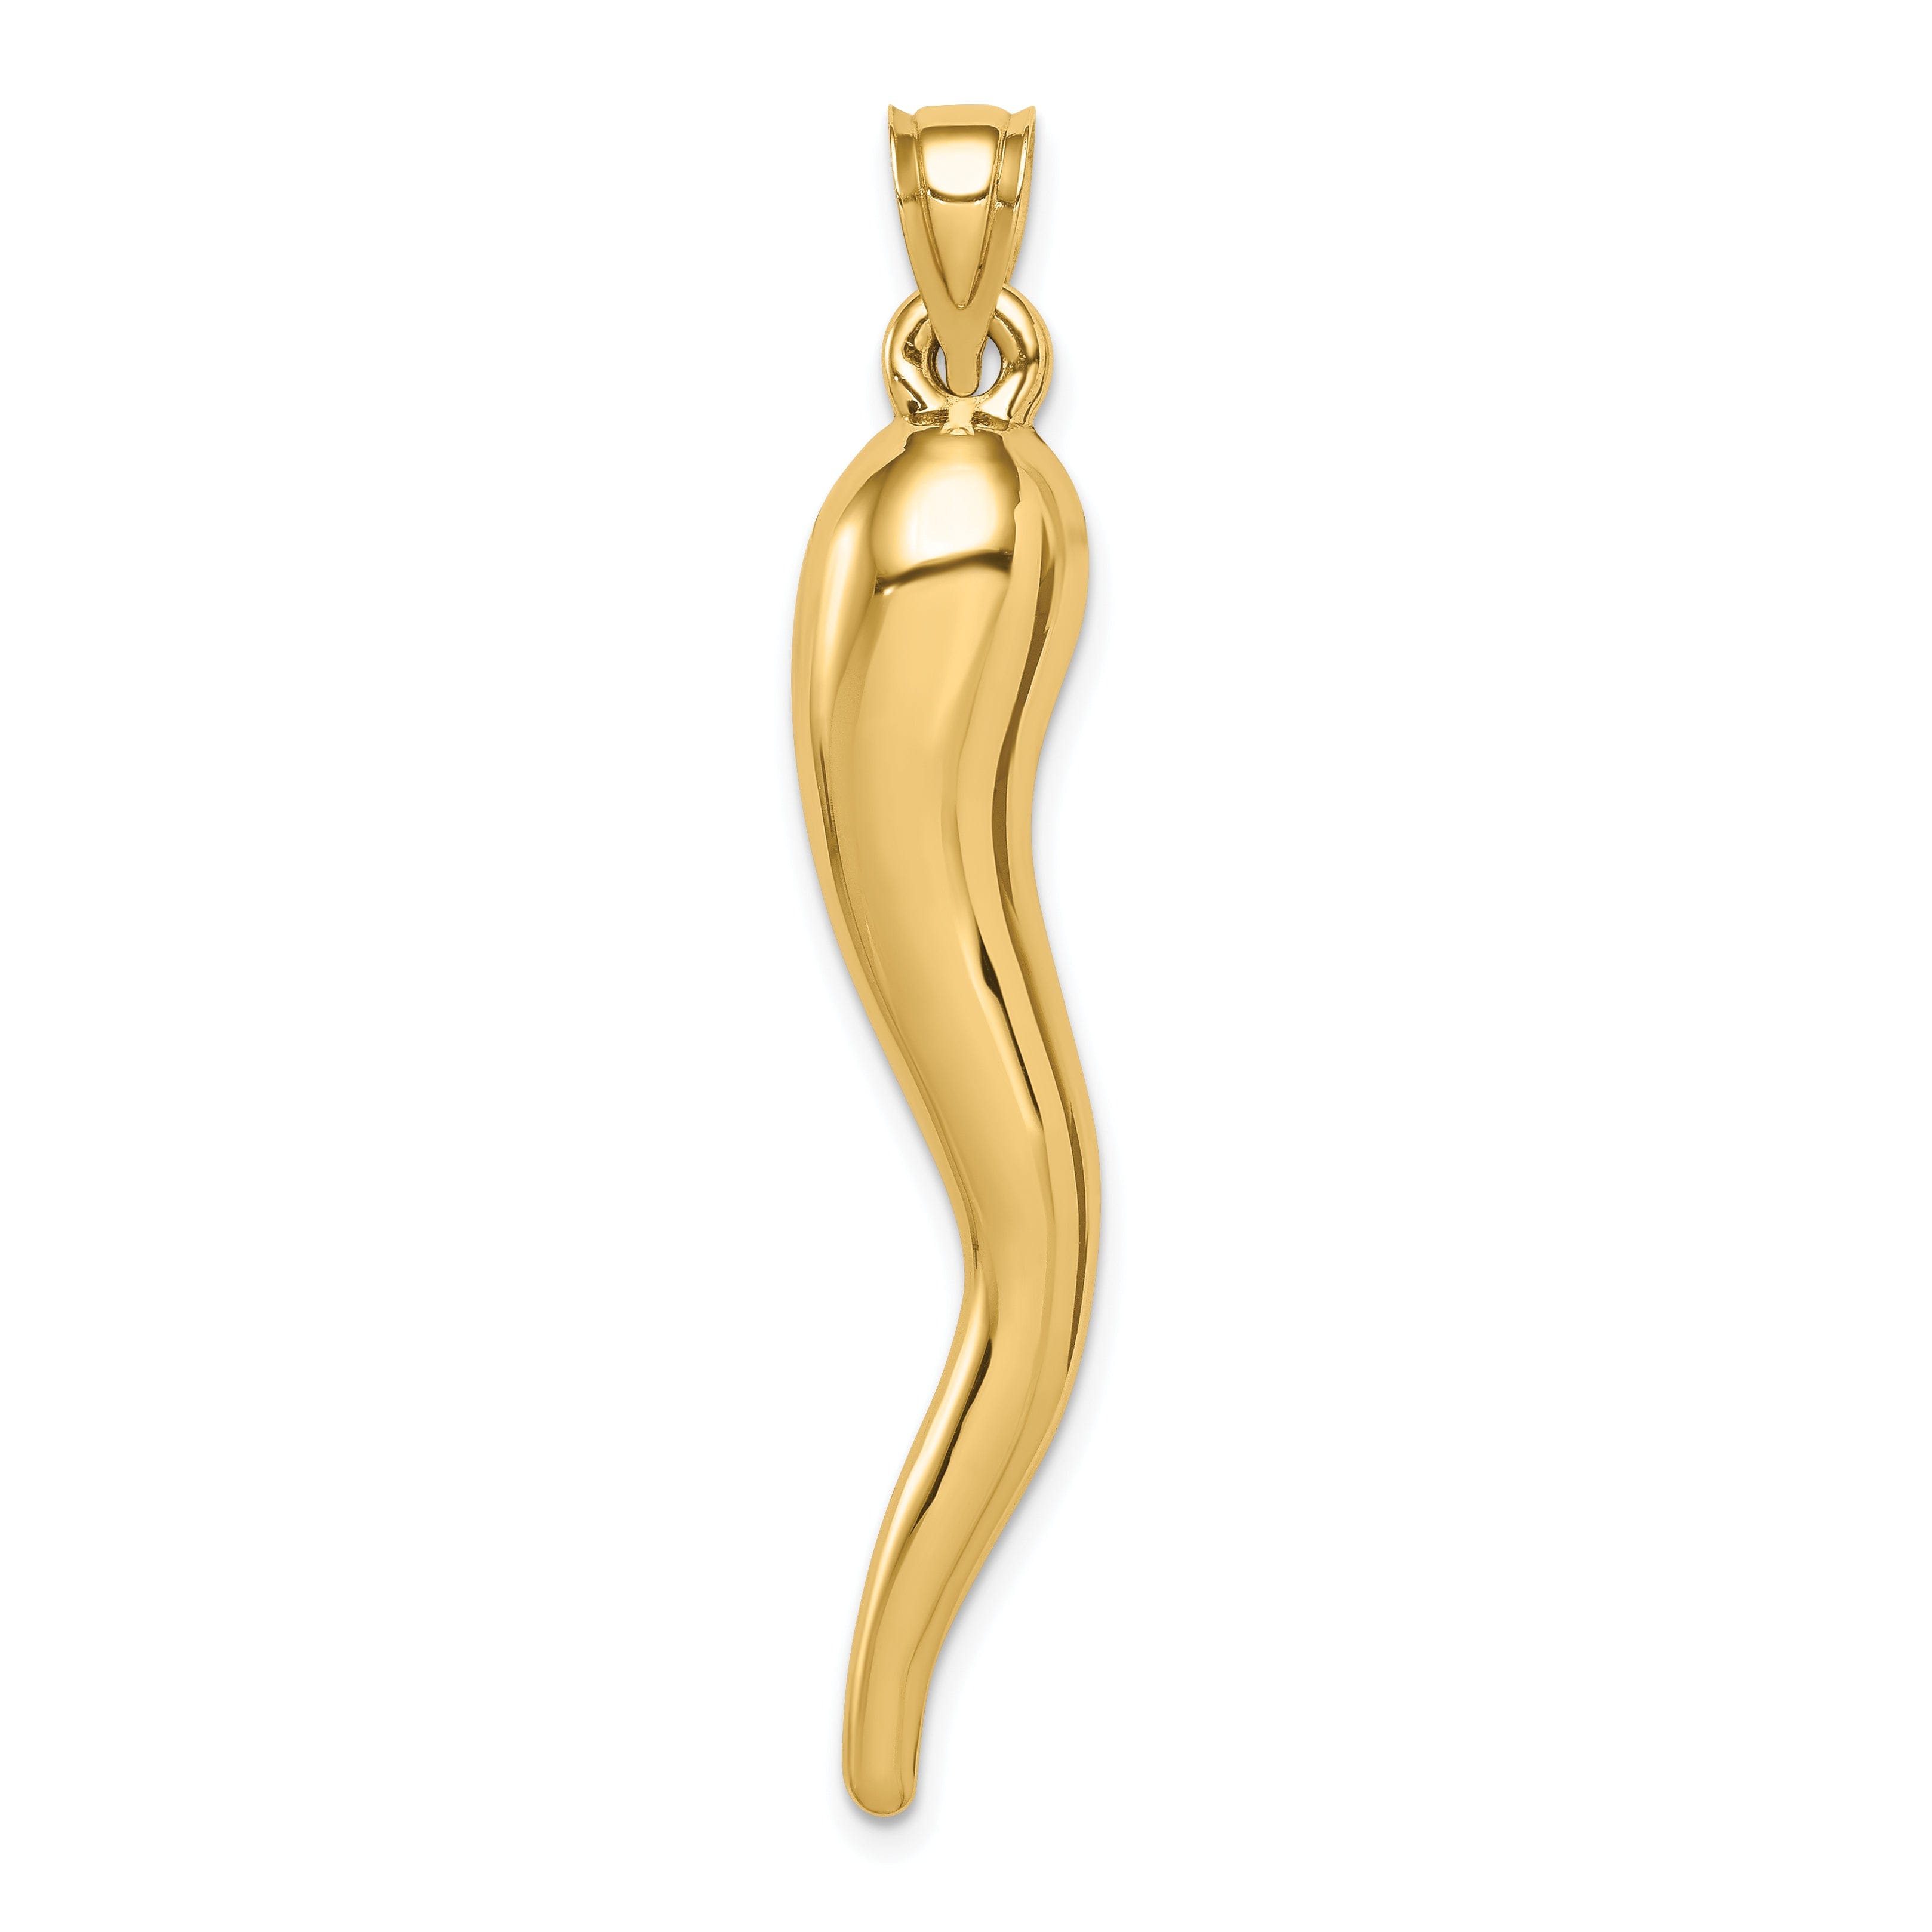 Madi K 14k Yellow Gold Small Hollow Dolphin Polished Charm Pendant 